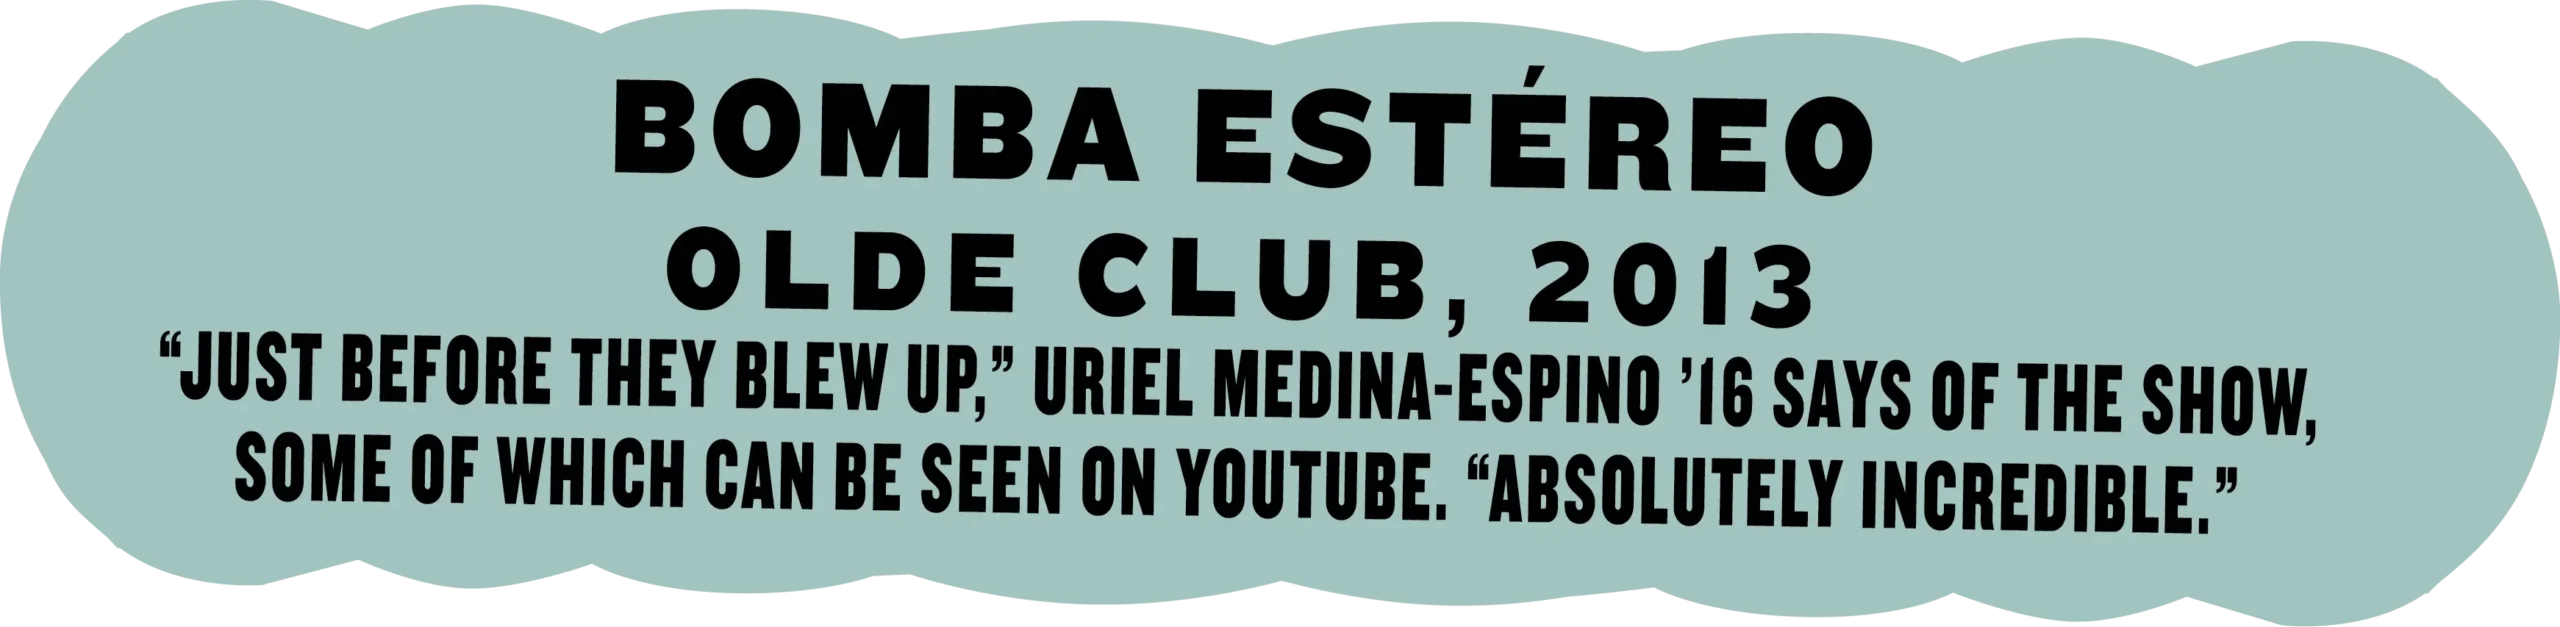 Bomba Estéreo, Olde Club, 2013; “Just before they blew up,” Uriel Medina-Espino ’16 says of the show, some of which can be seen on YouTube. “Absolutely incredible.”